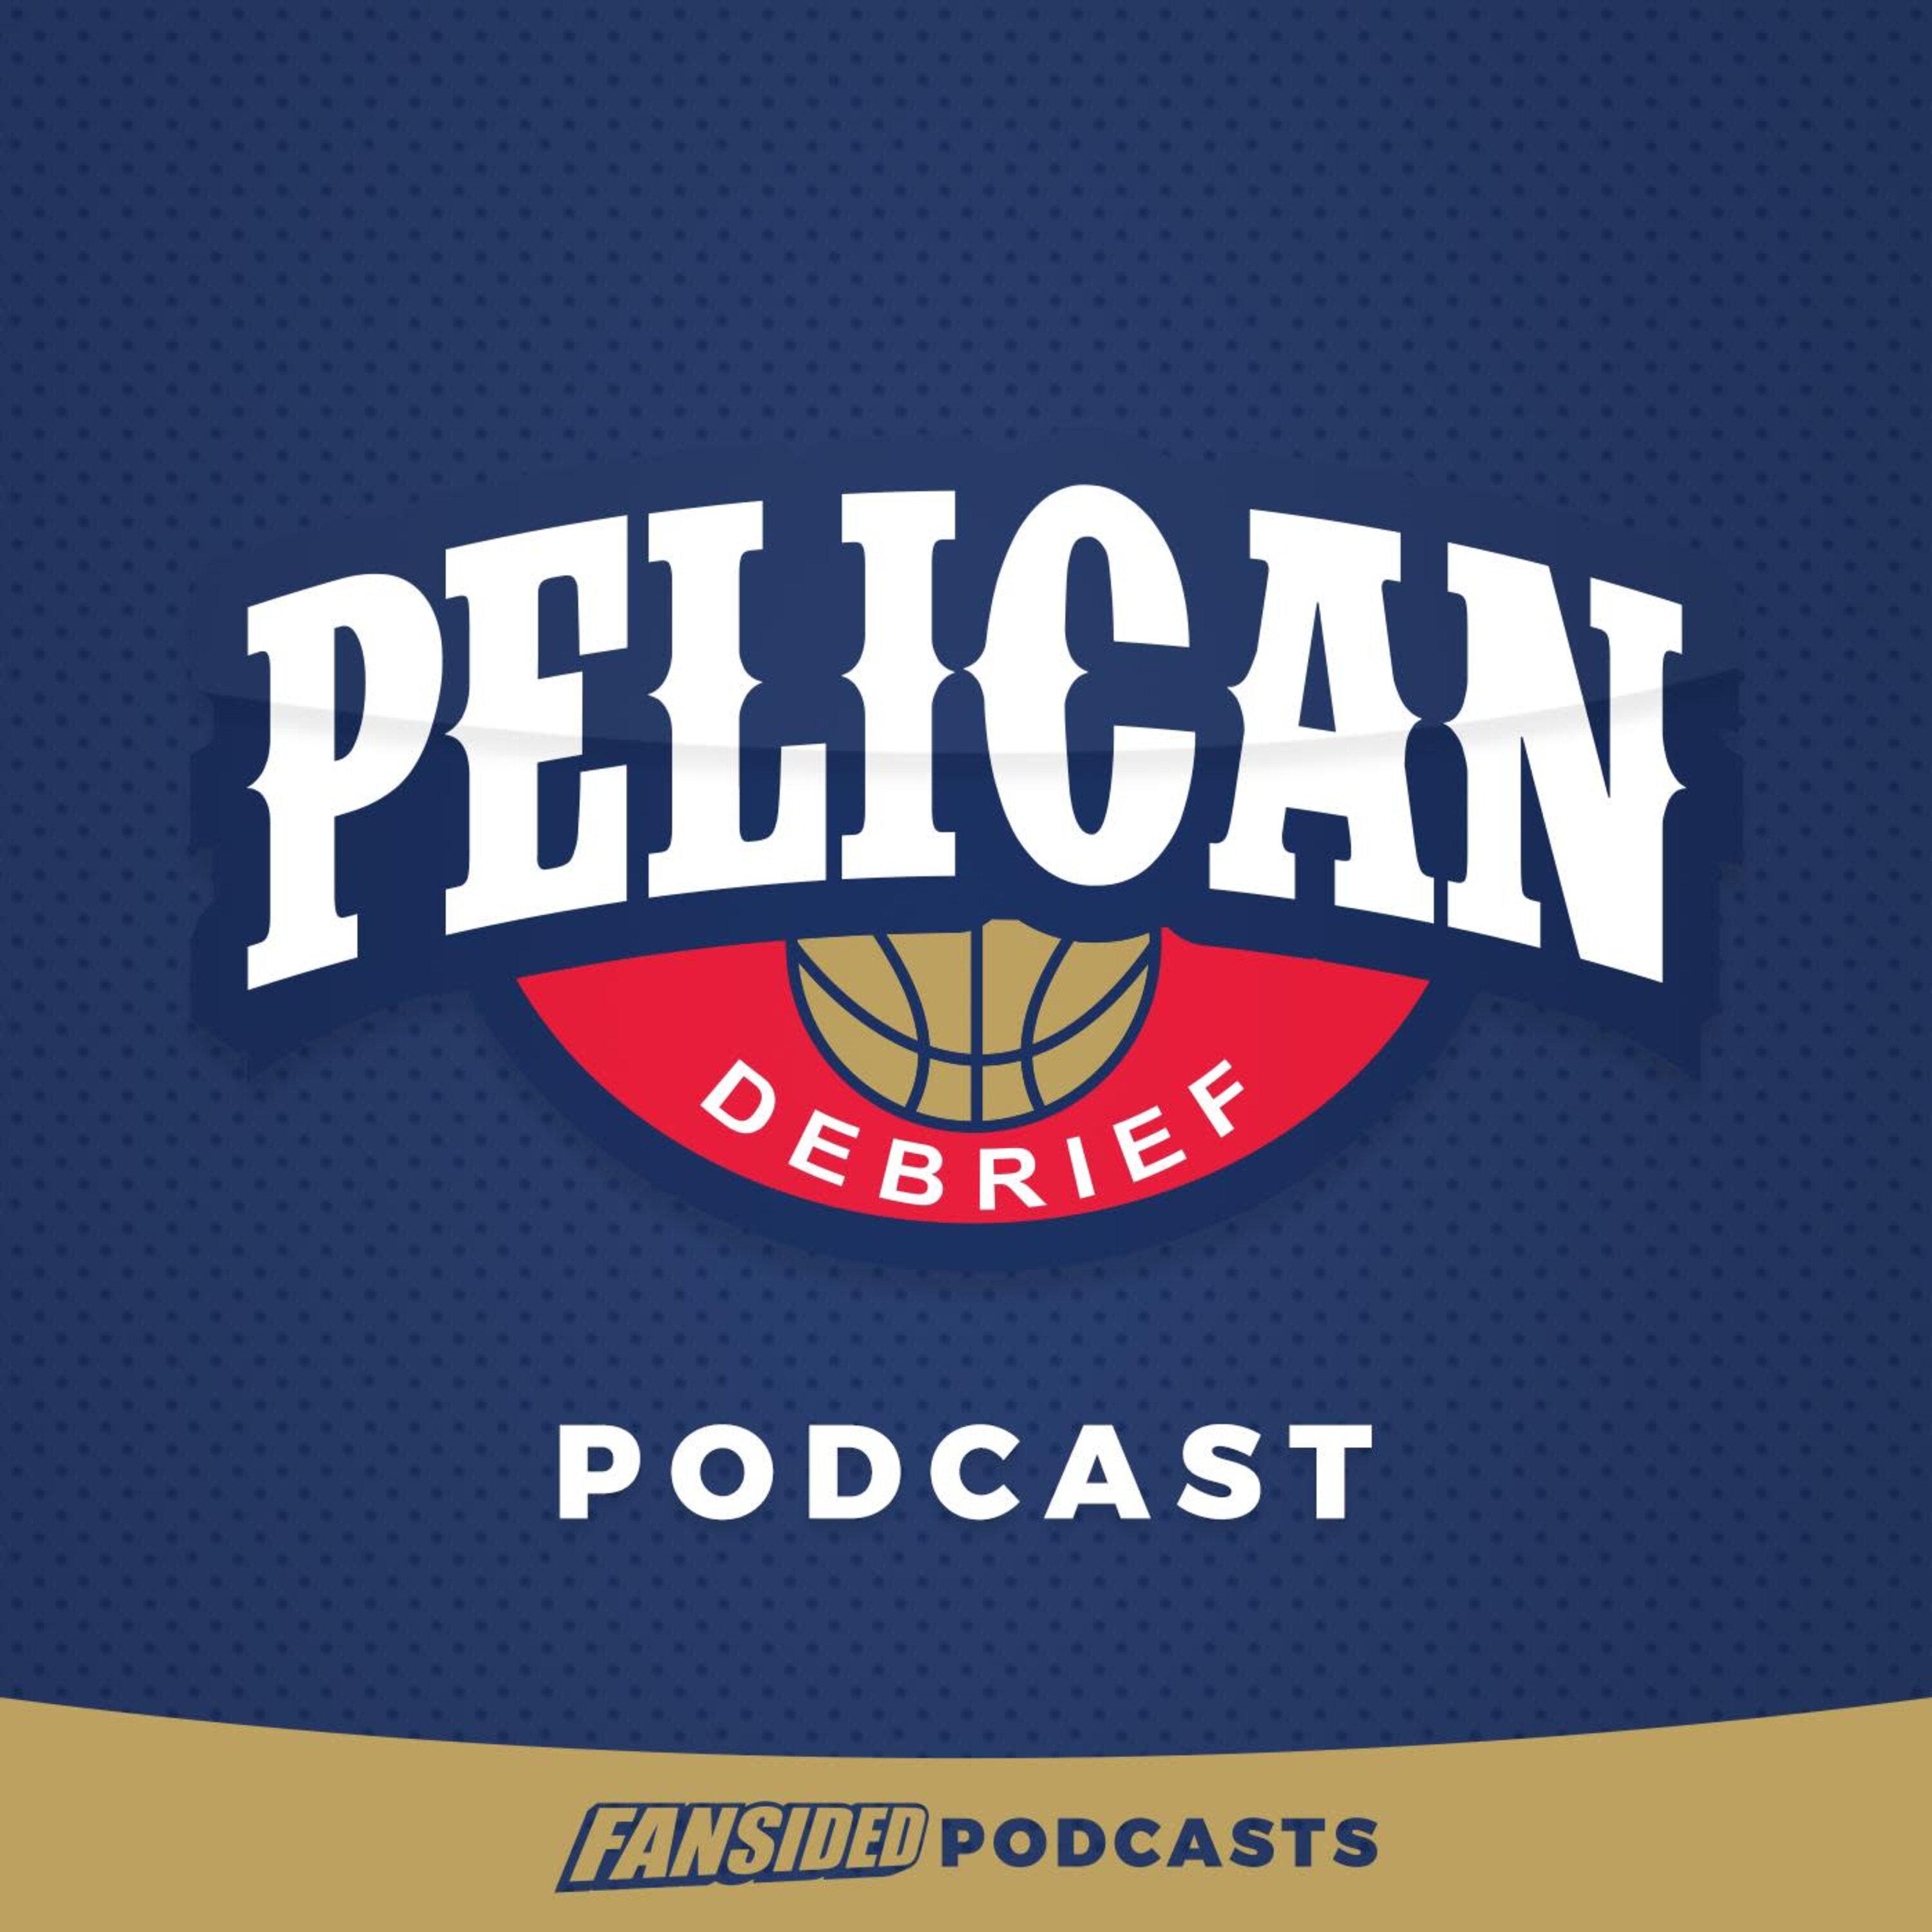 Pelican Debrief Podcast on the New Orleans Pelicans